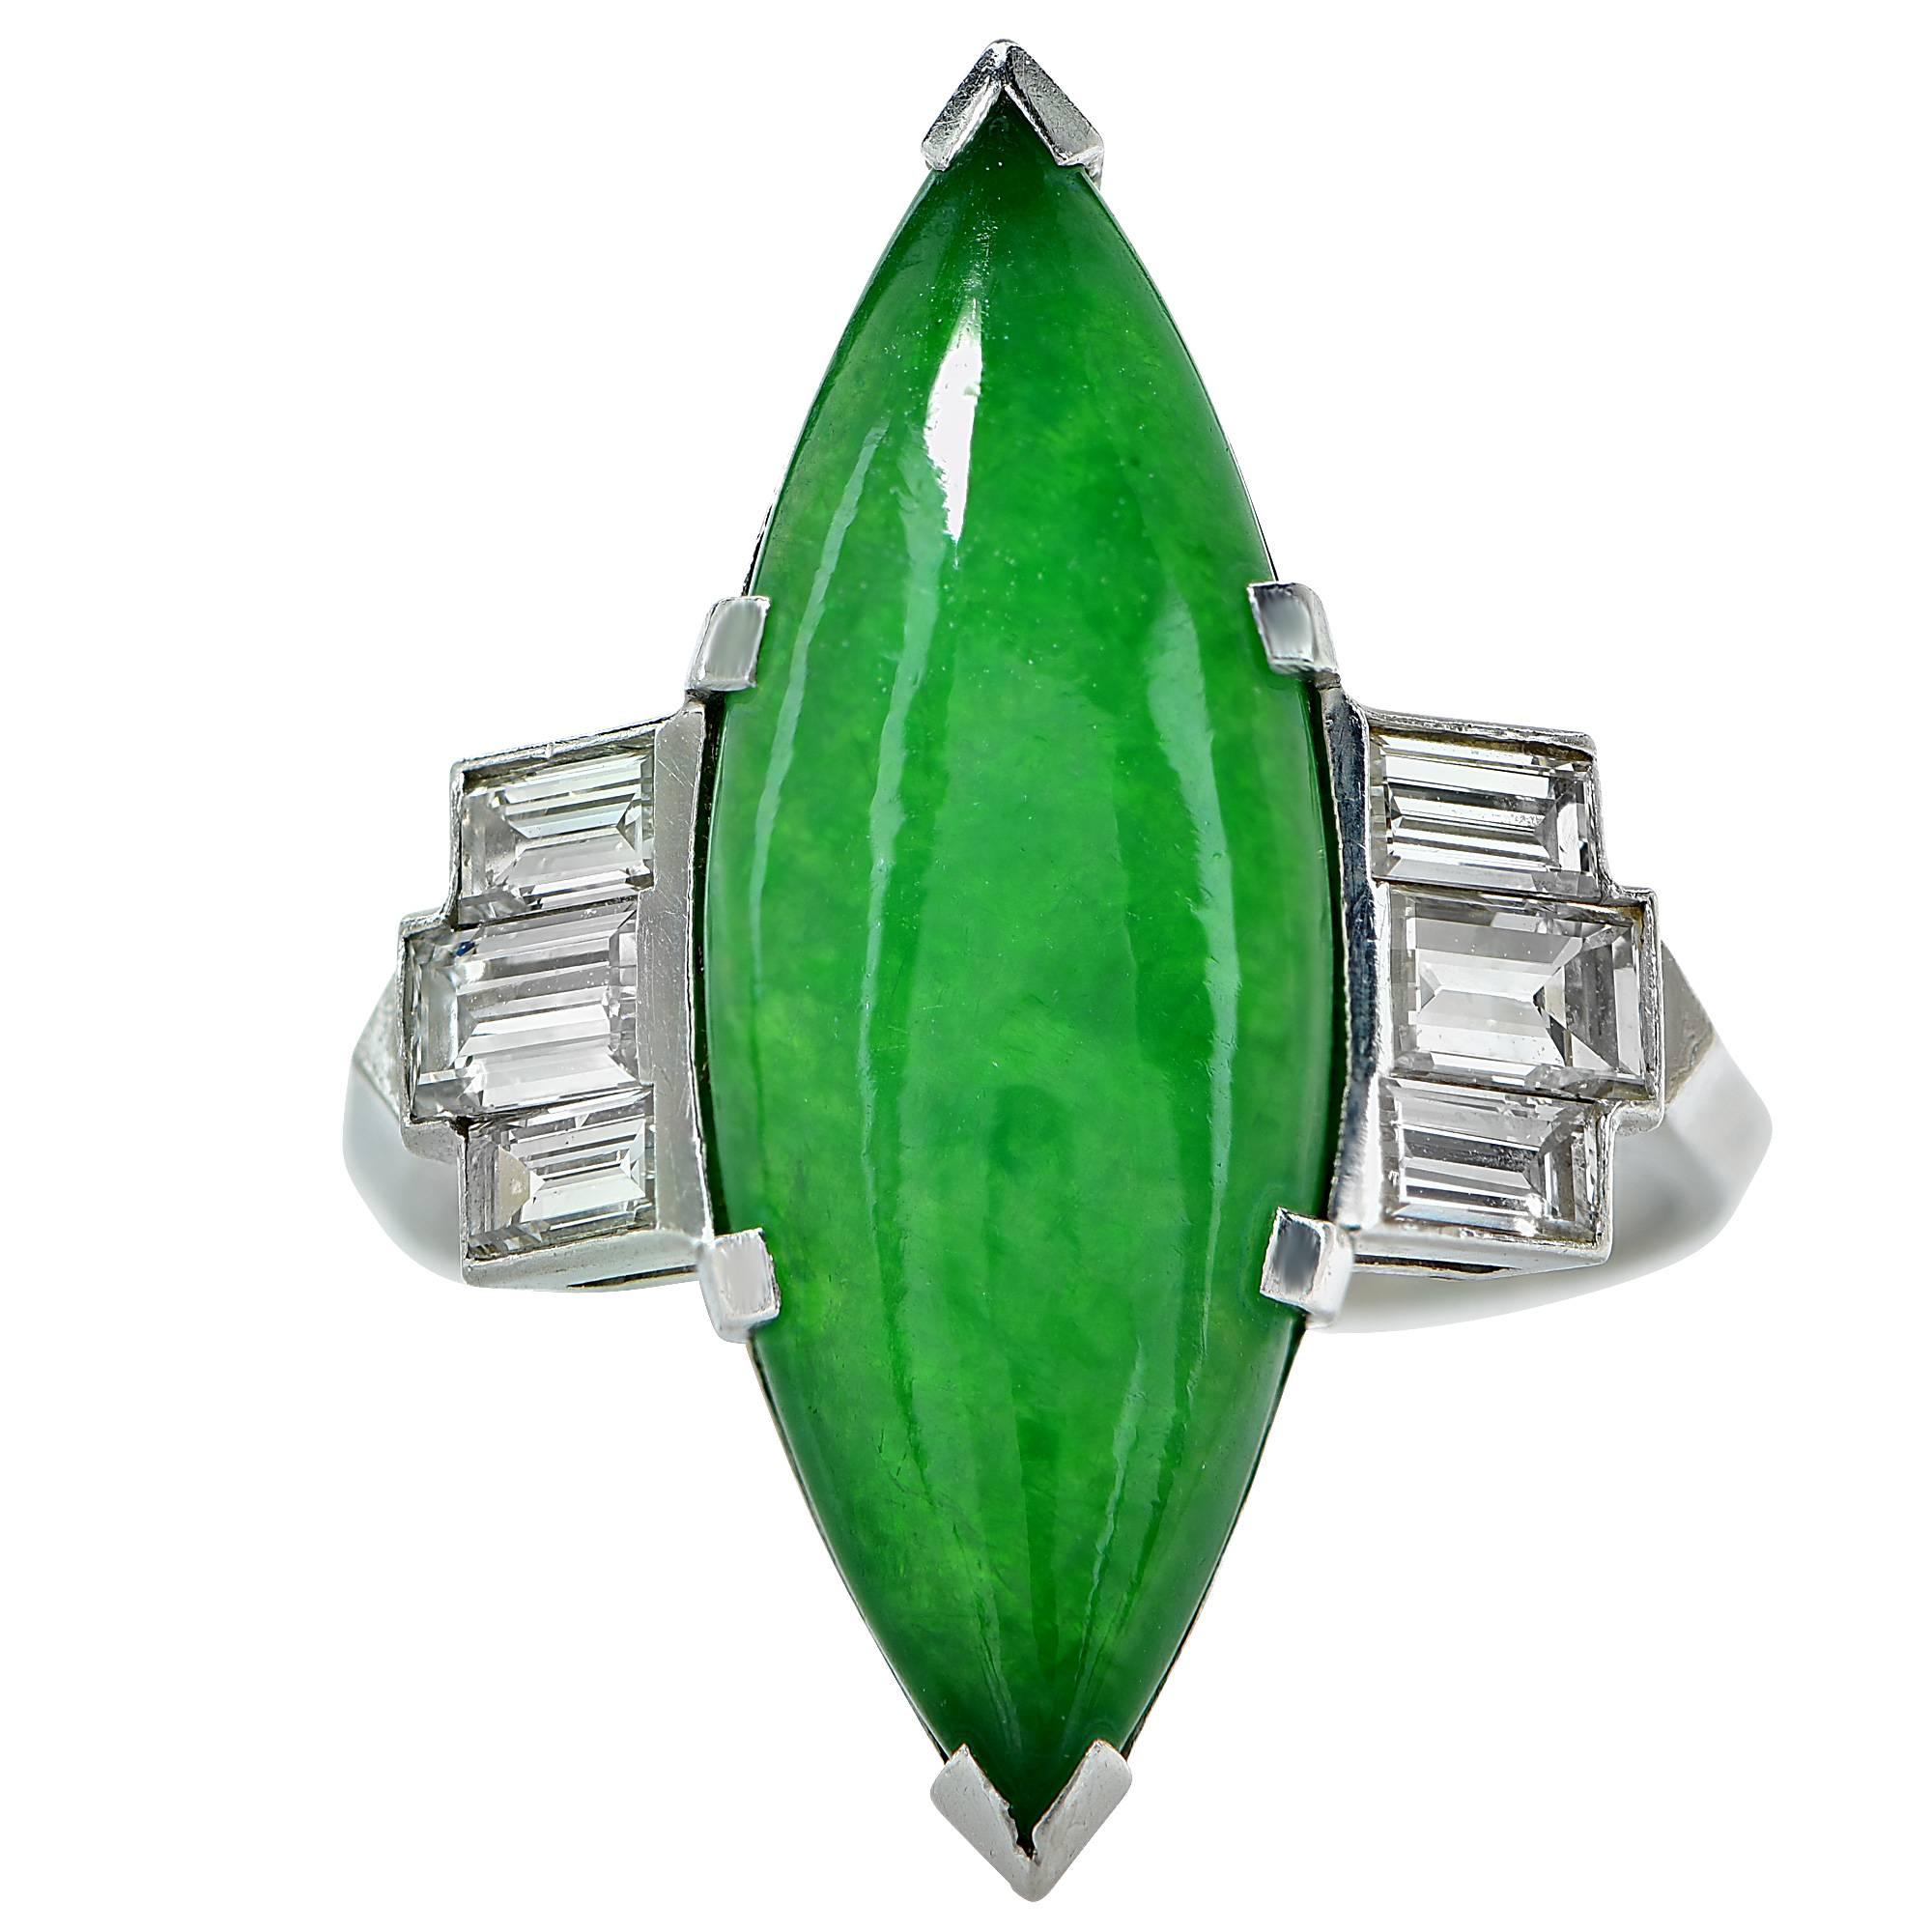 Circa 1950s platinum ring featuring a GIA graded natural jadeite jade cabochon weighing approximately 5.50cts accented by 6 baguette cut diamonds weighing approximately 1.10cts total, F color, VS clarity.

The ring is a size 7.25 and can be sized up